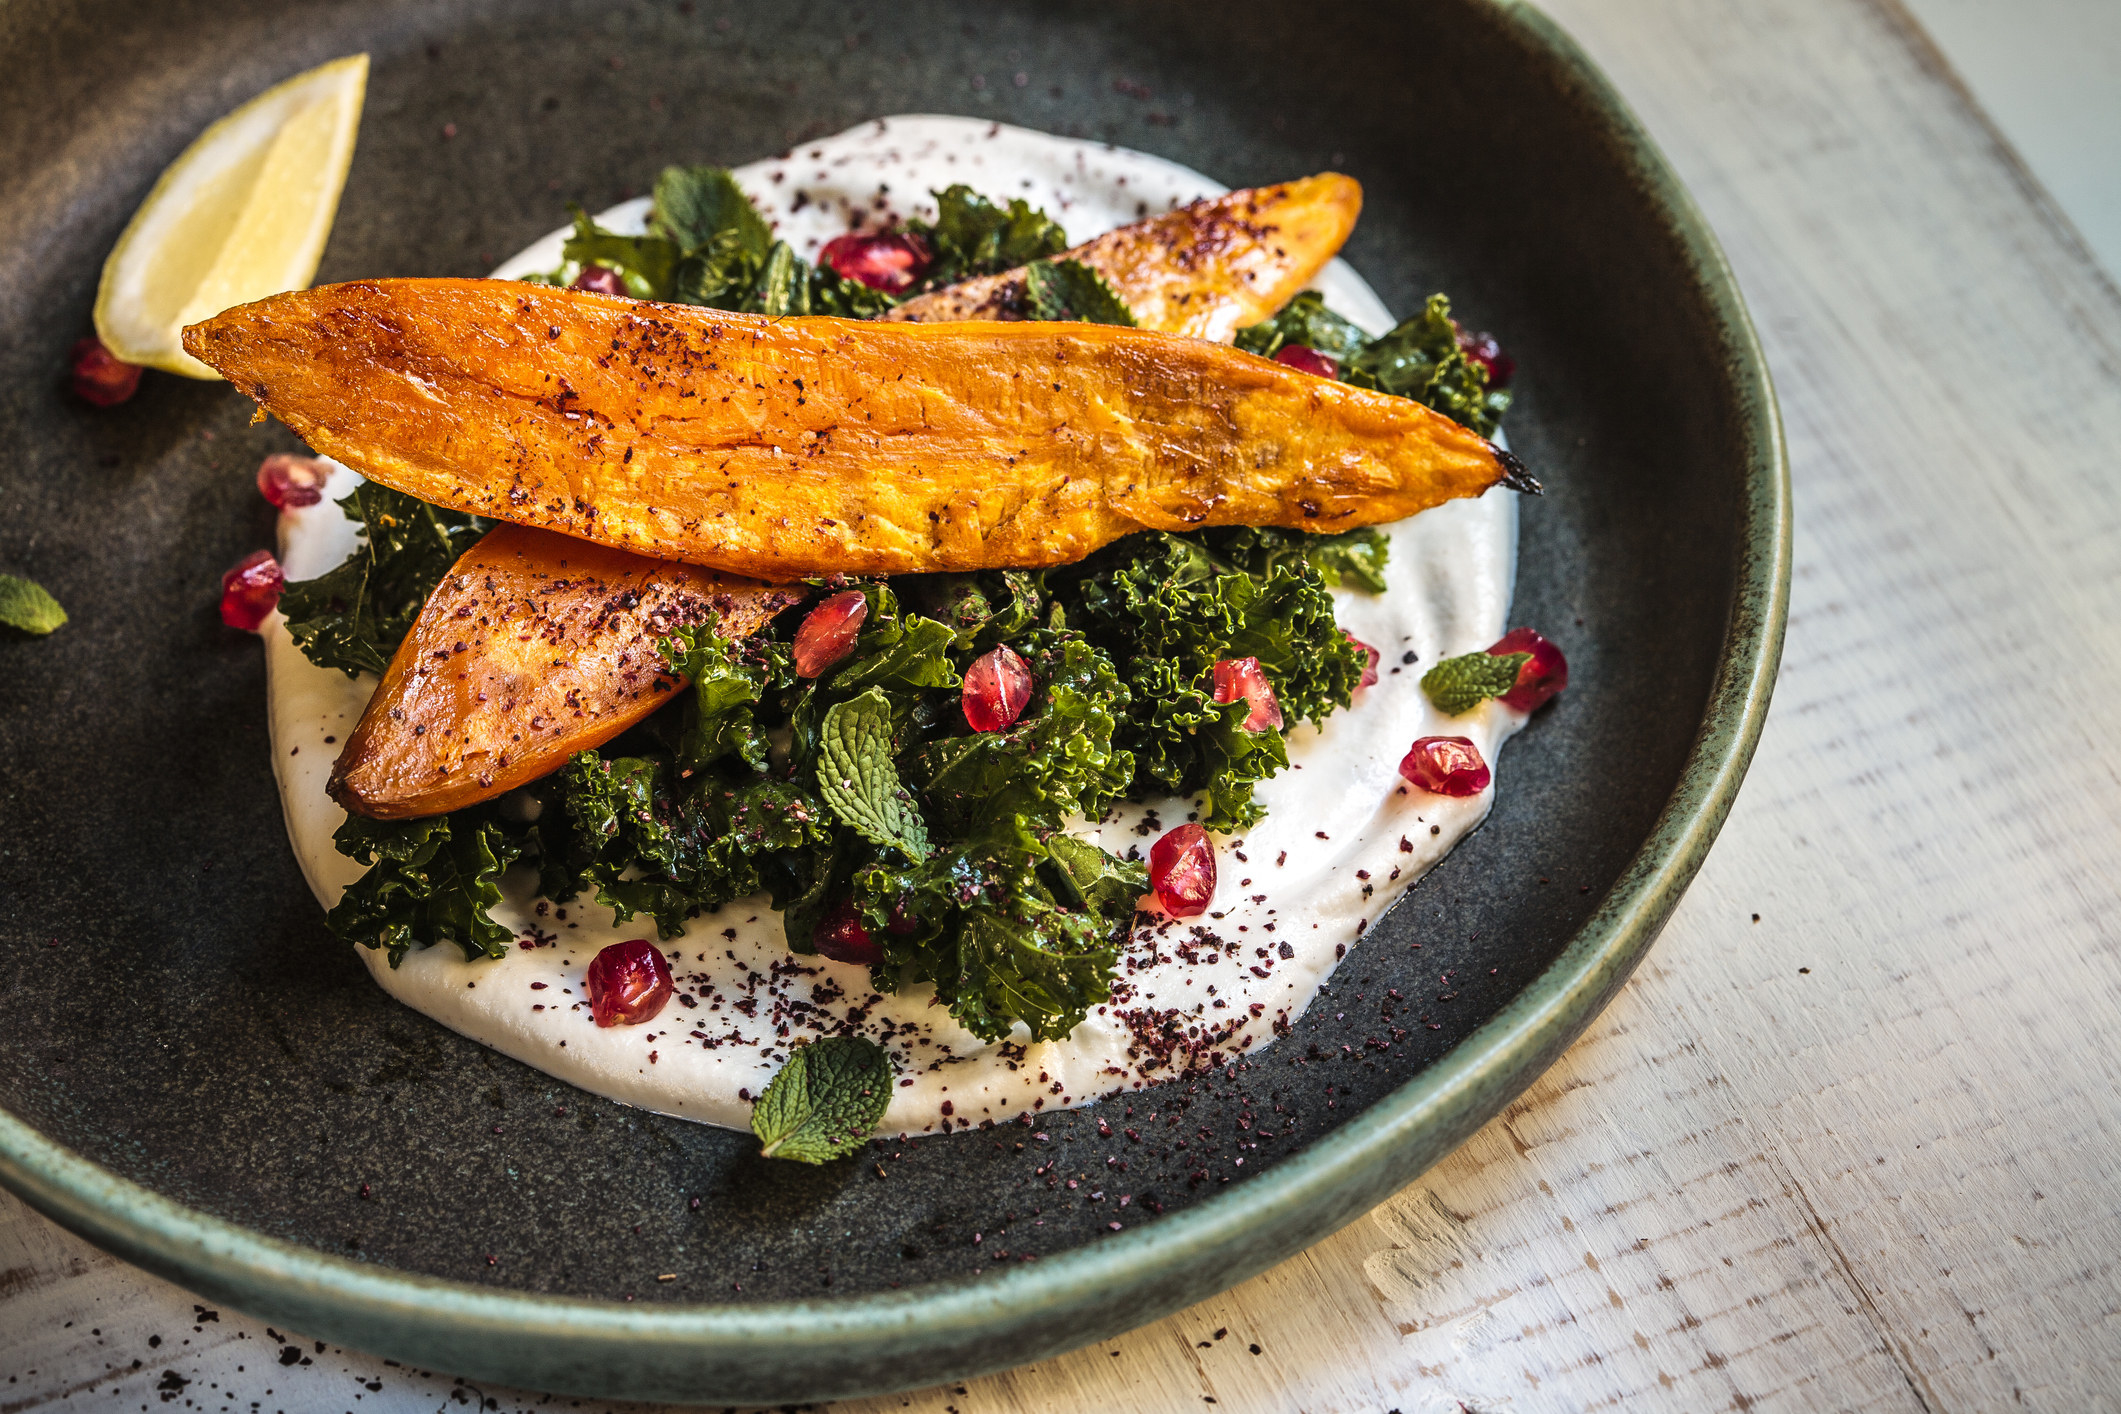 Sweet potatoes and kale over yogurt sauce with sumac and spices.